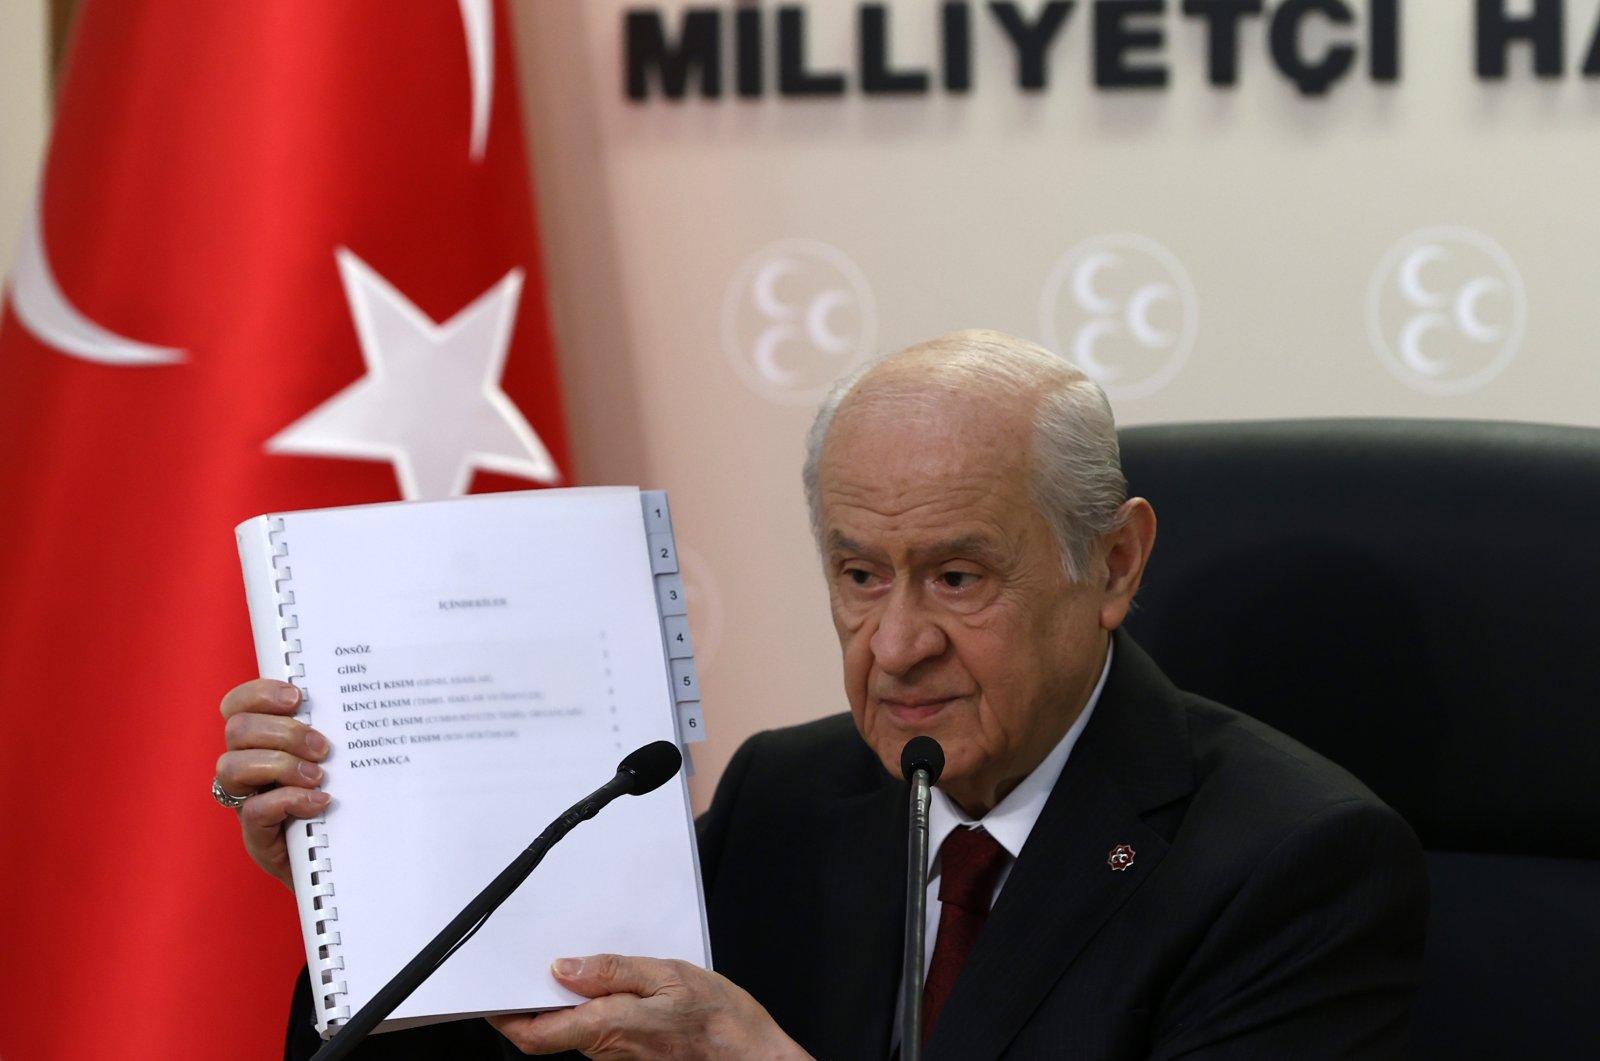 MHP Chairperson Devlet Bahçeli speaks to reporters about his party's constitution proposal at the MHP headquarters in Turkey's capital Ankara, May 4, 2021. (AA Photo)